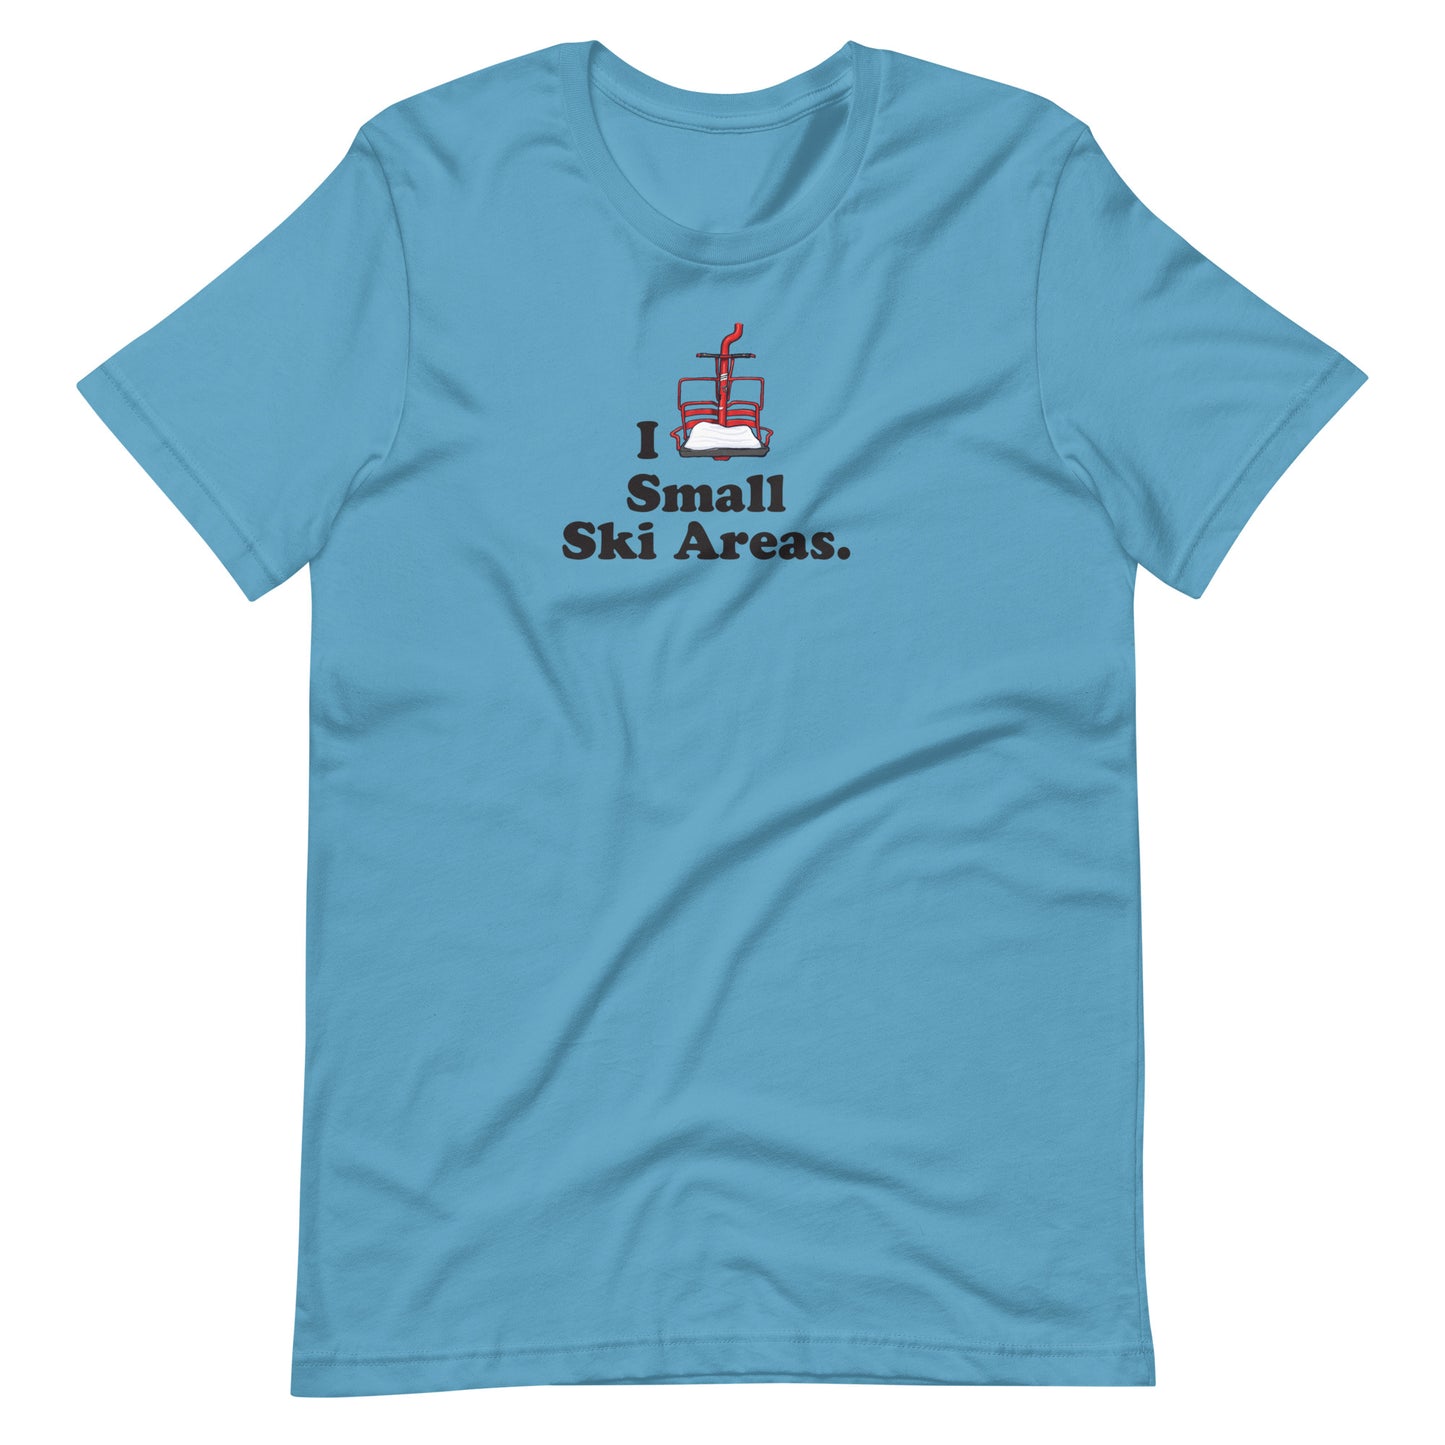 Blue Unisex Short-Sleeve Cotton T-Shirt with text I Love Small Ski Areas